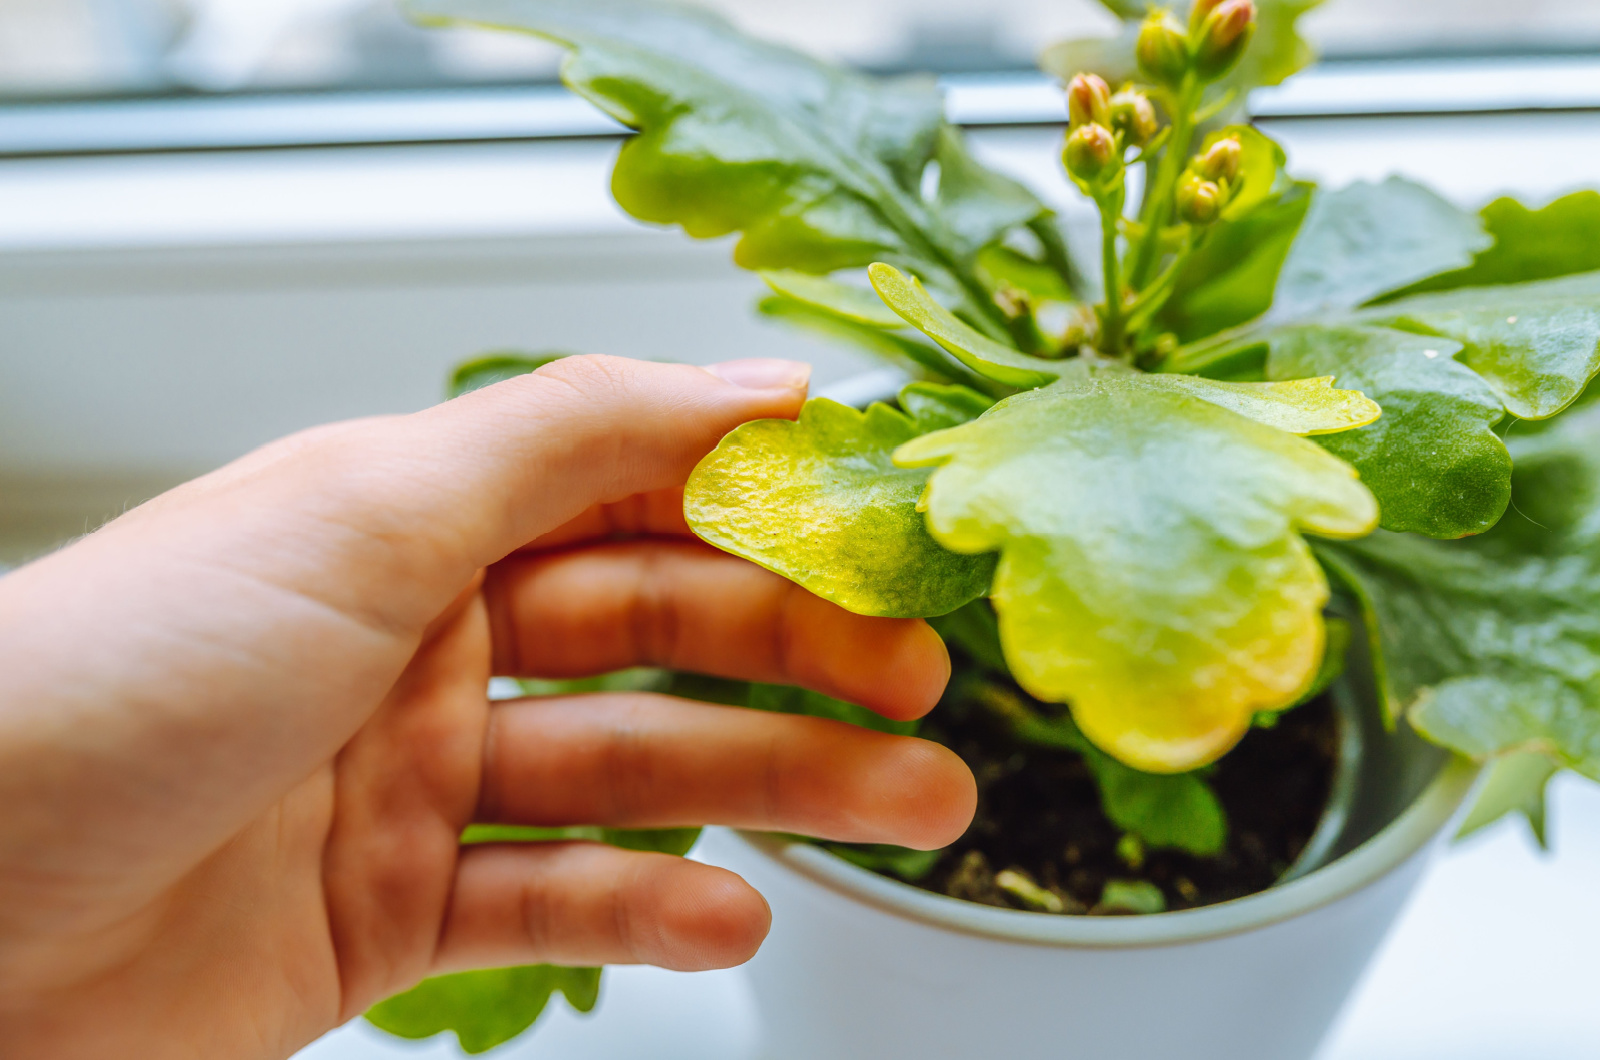 woman's hand shows yellow leaves of Kalanchoe